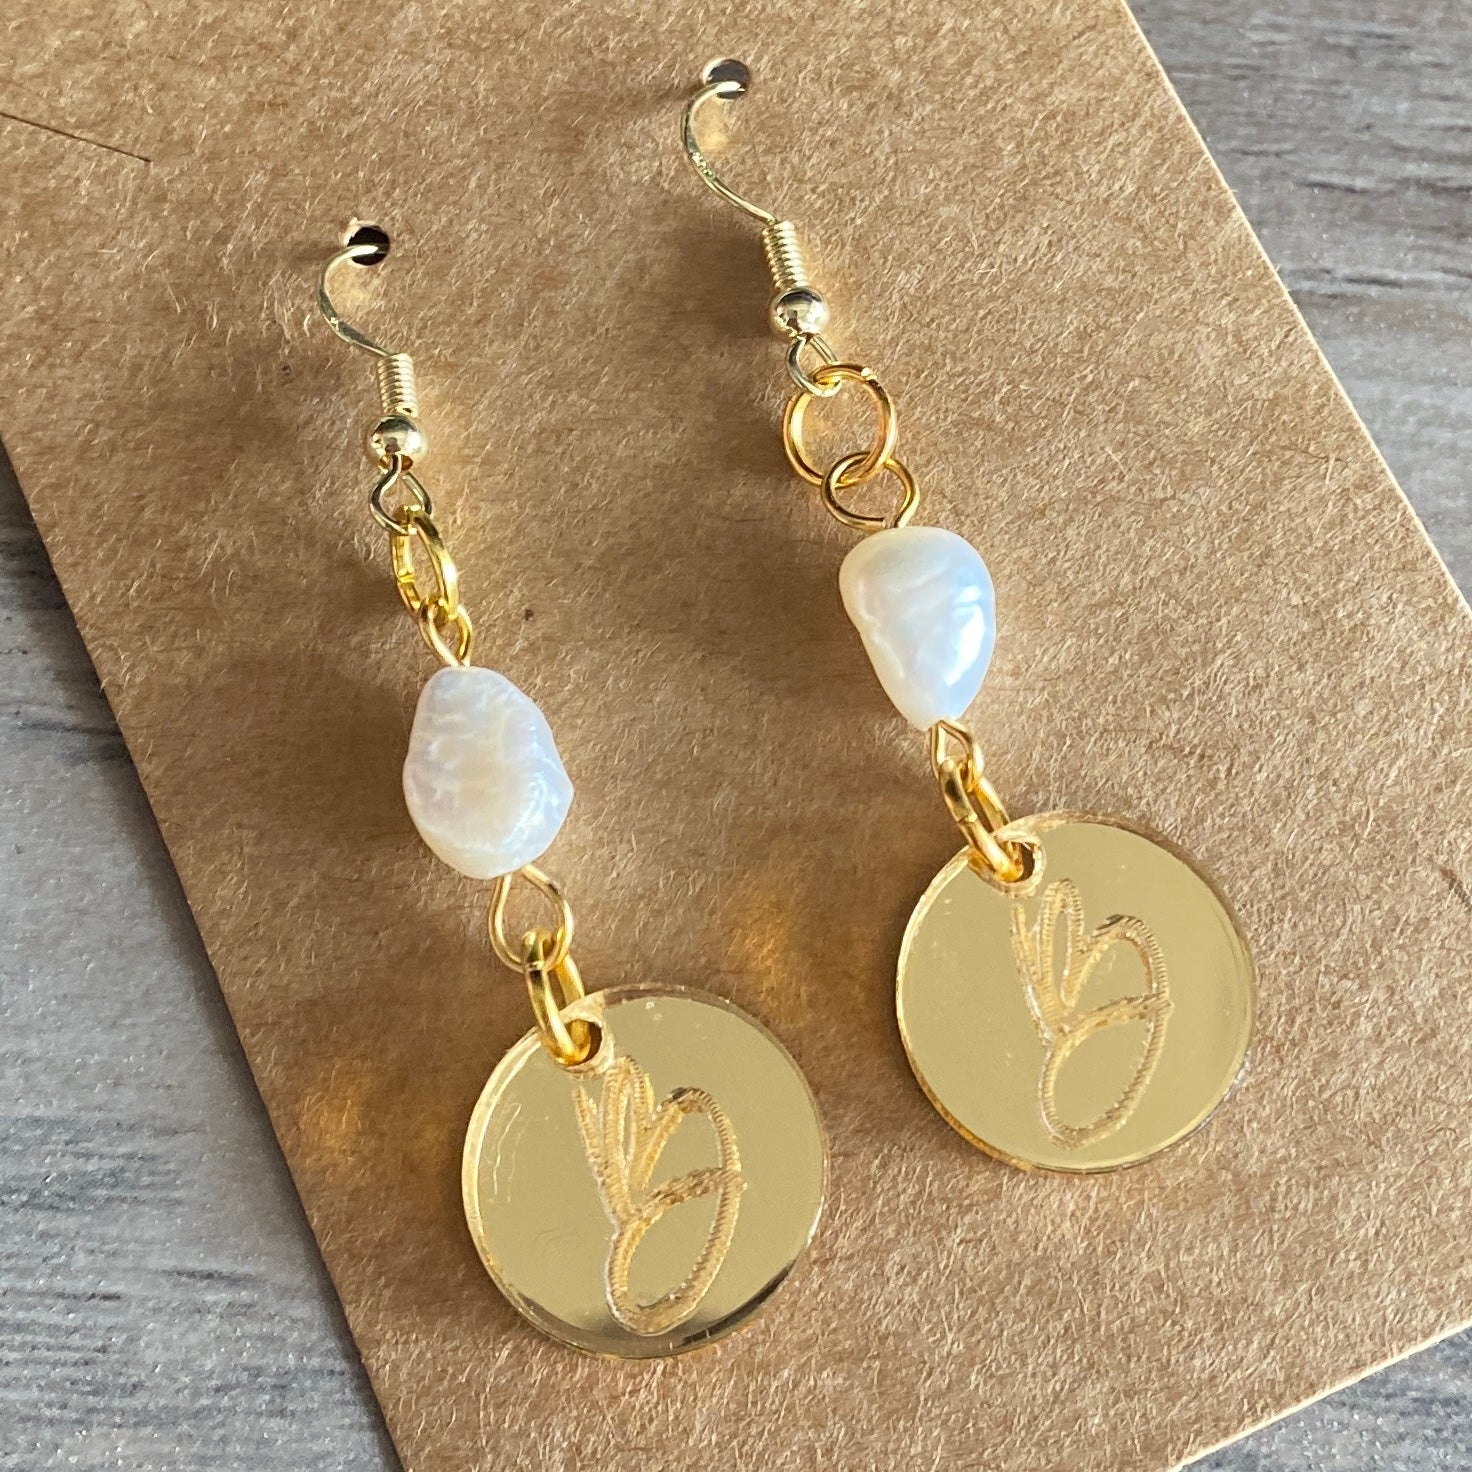 Engraved Initial Earrings with Pearl